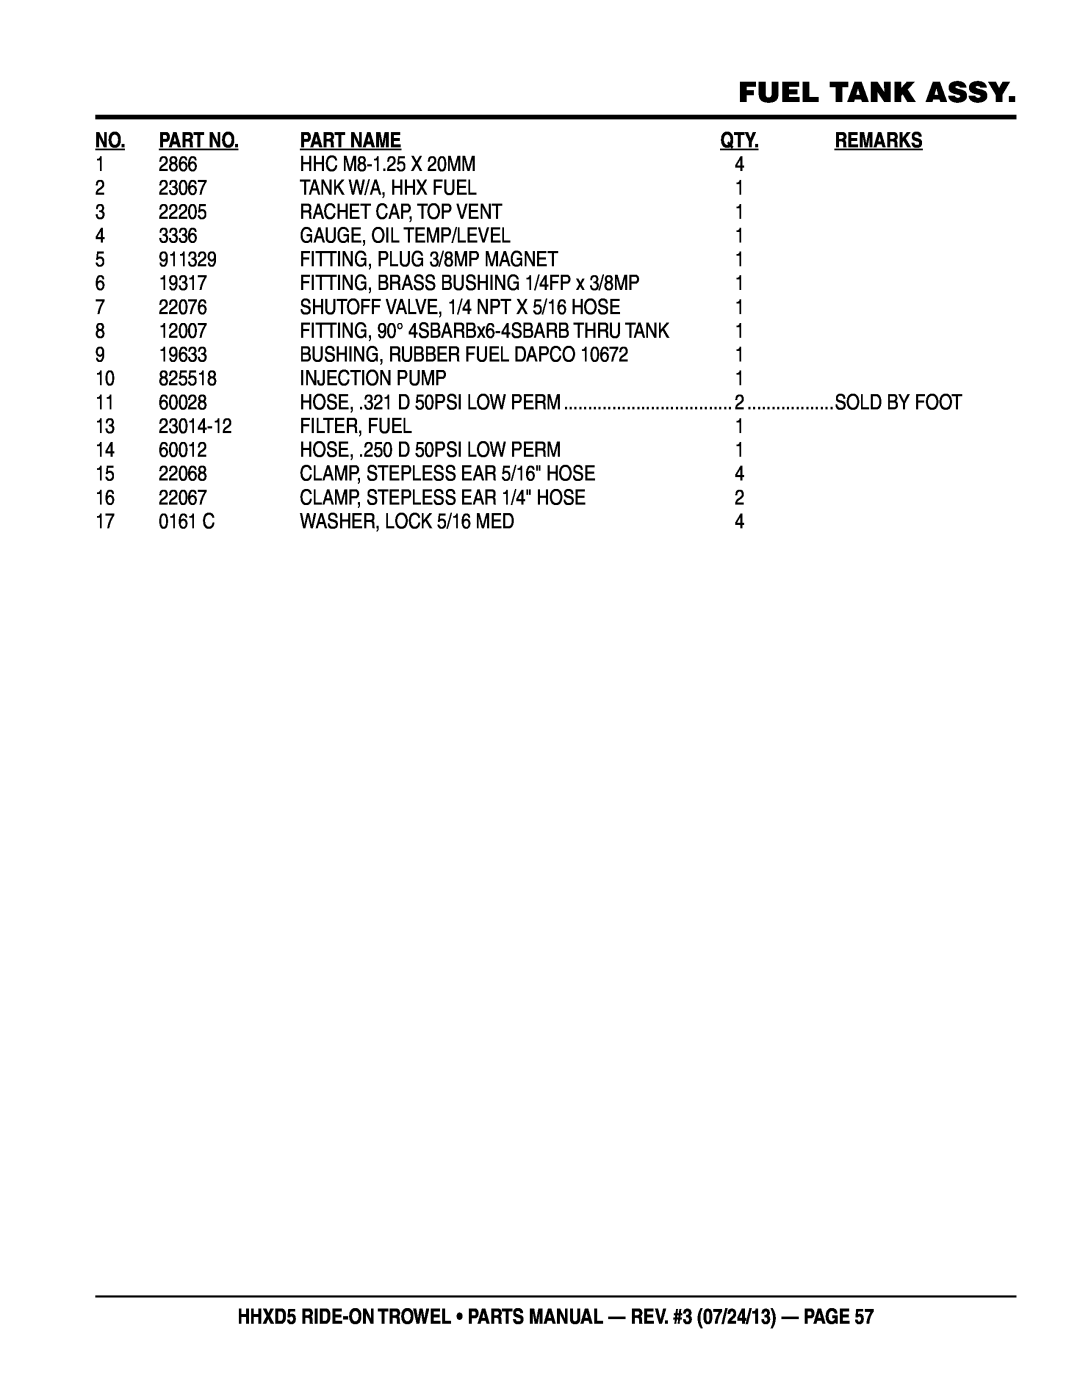 Multiquip HHSD5 FUEL TANK assy, Part Name, Remarks, HHXD5 RIDE-ON TROWEL parts manual - rev. #3 07/24/13 - page 